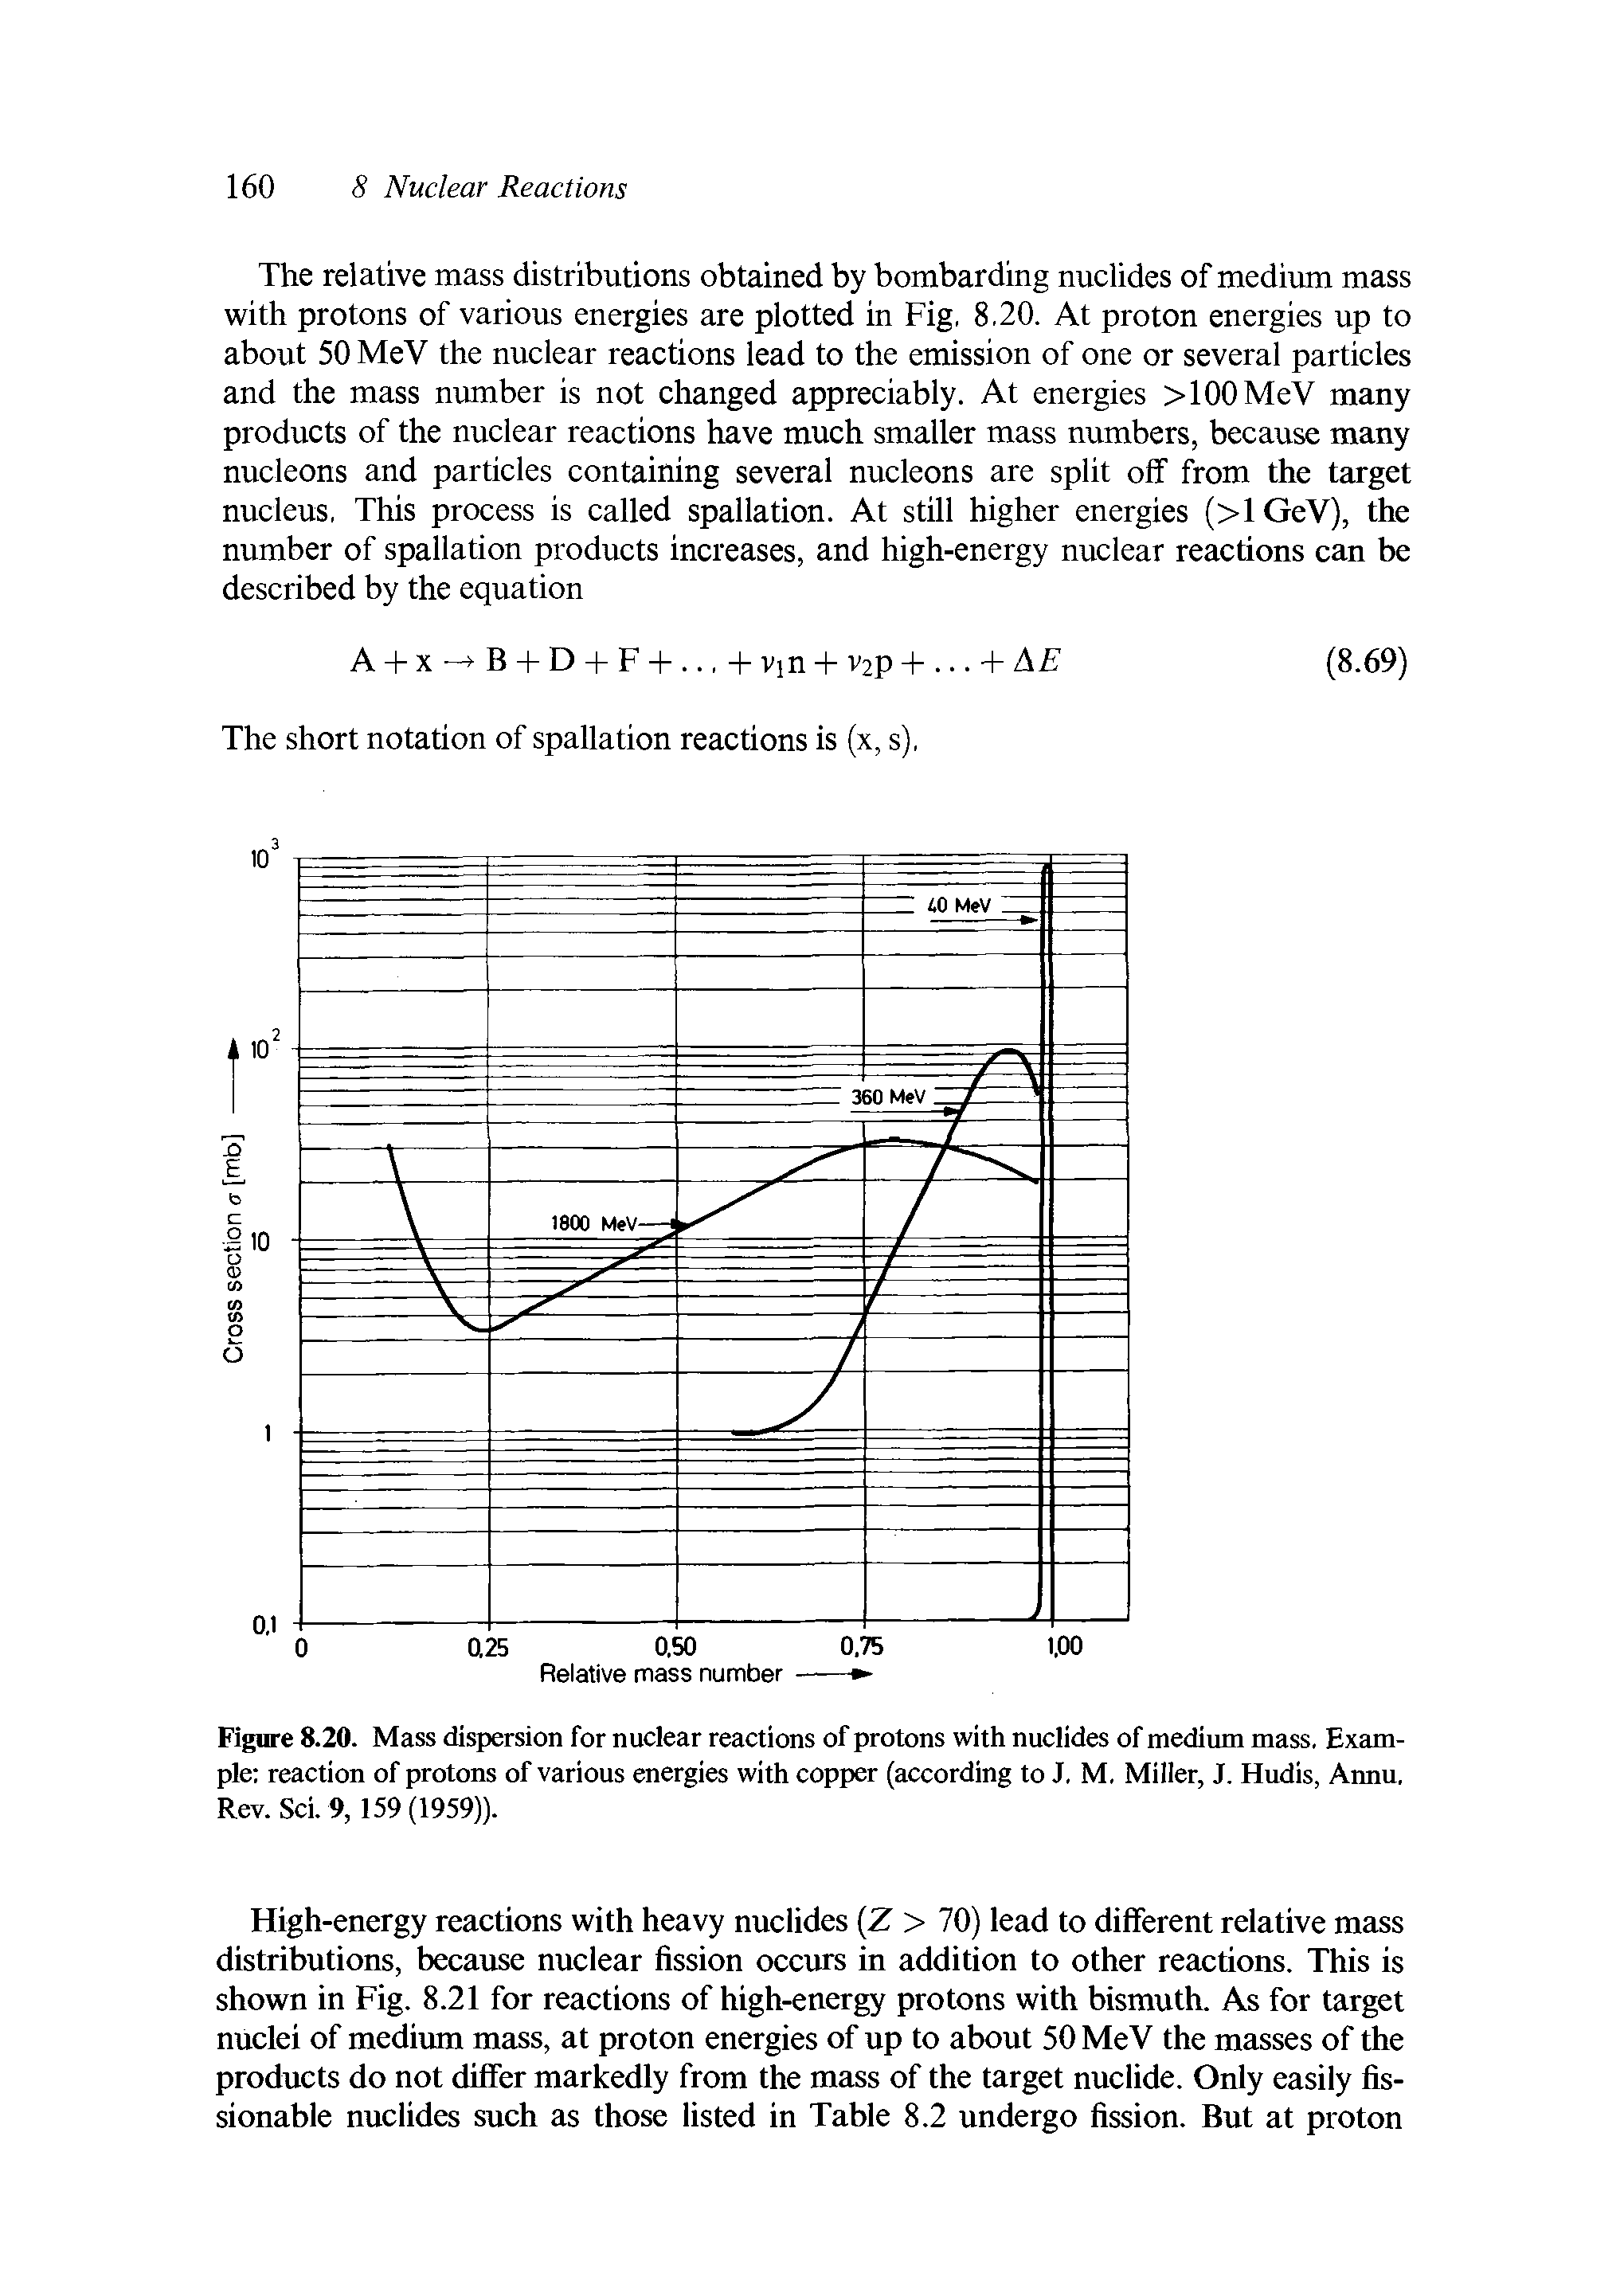 Figure 8.20. Mass dispersion for nuclear reactions of protons with nuclides of medium mass. Example reaction of protons of various energies with copper (according to J. M. Miller, J. Hudis, Annu, Rev. Sci. 9, 159 (1959)).